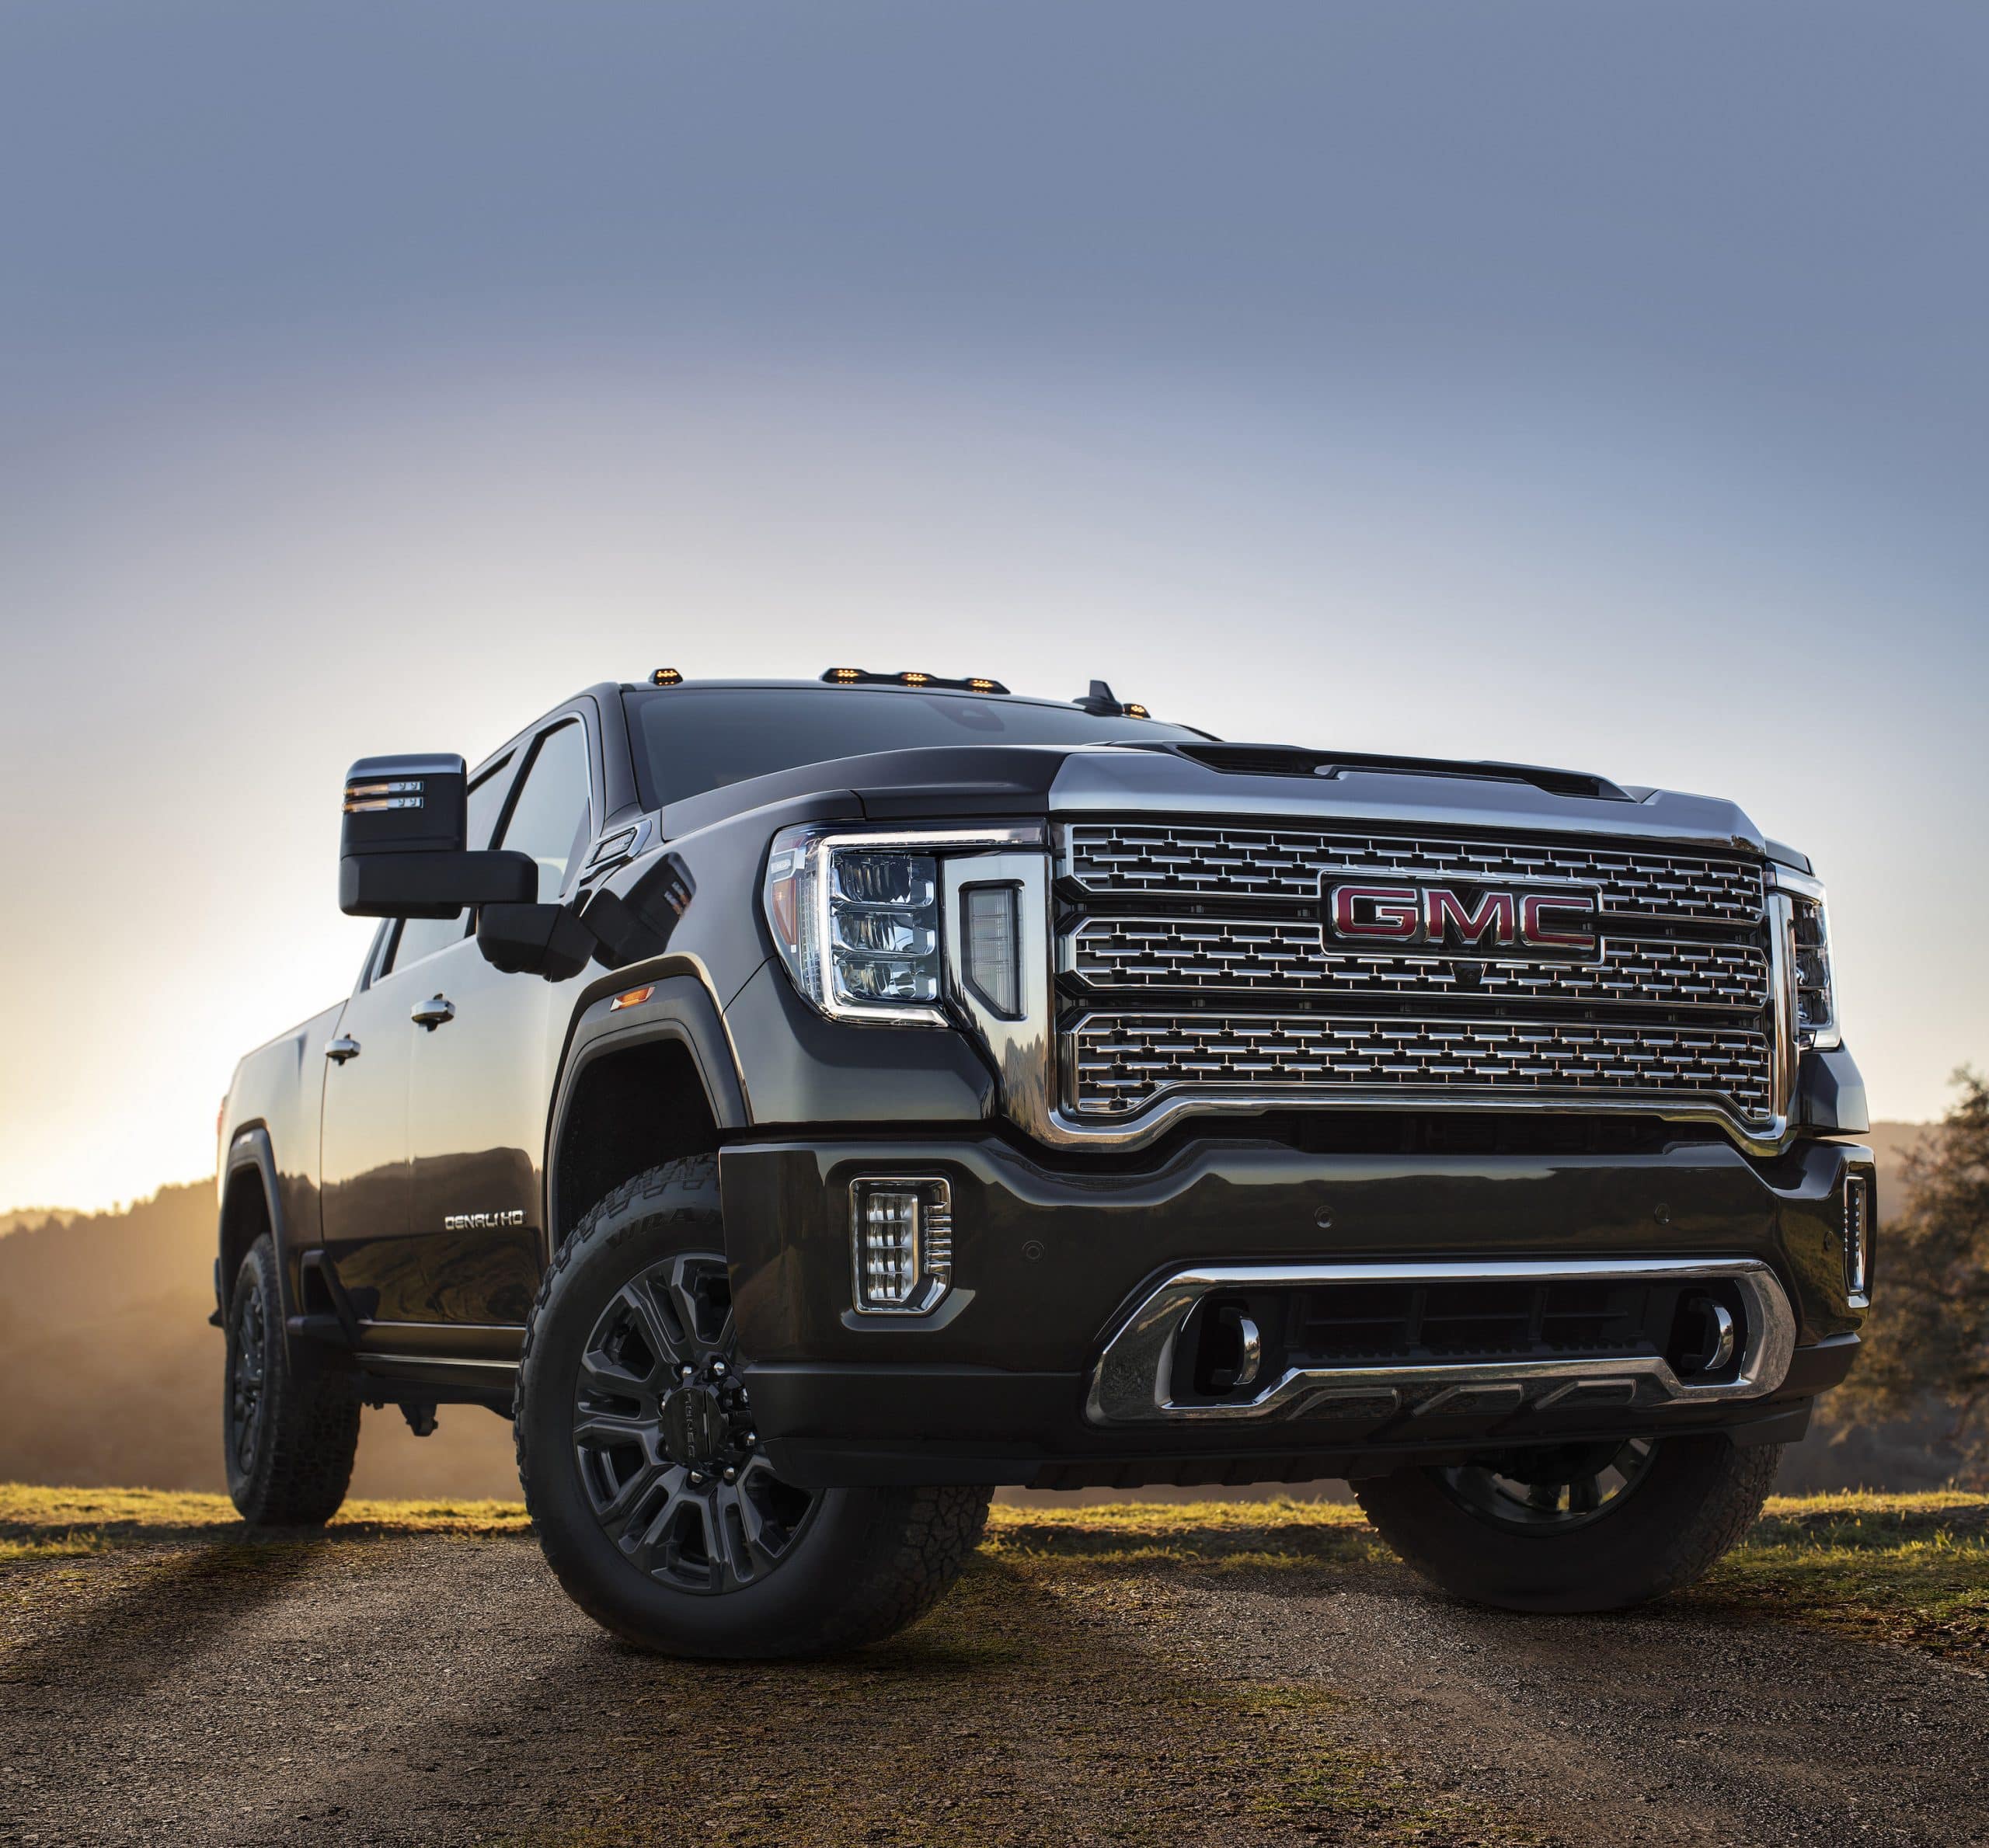 The 2022 GMC Sierra Is Getting Incredible Interior Upgrades